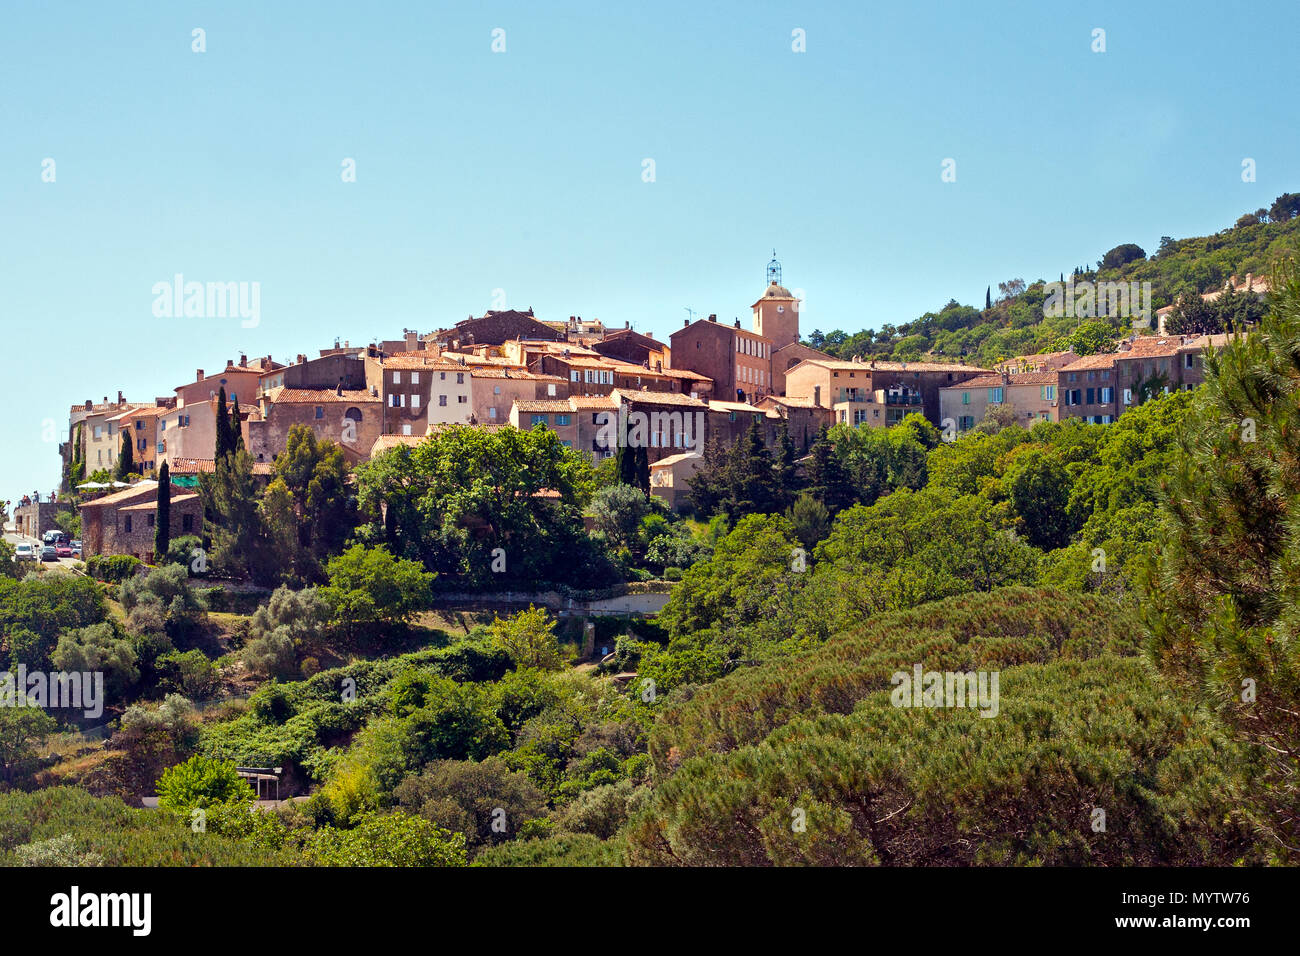 May 15, 2016: Ramatuelle, France- view of the french village of Ramatuelle surrounded by green trees on a sunny day Stock Photo